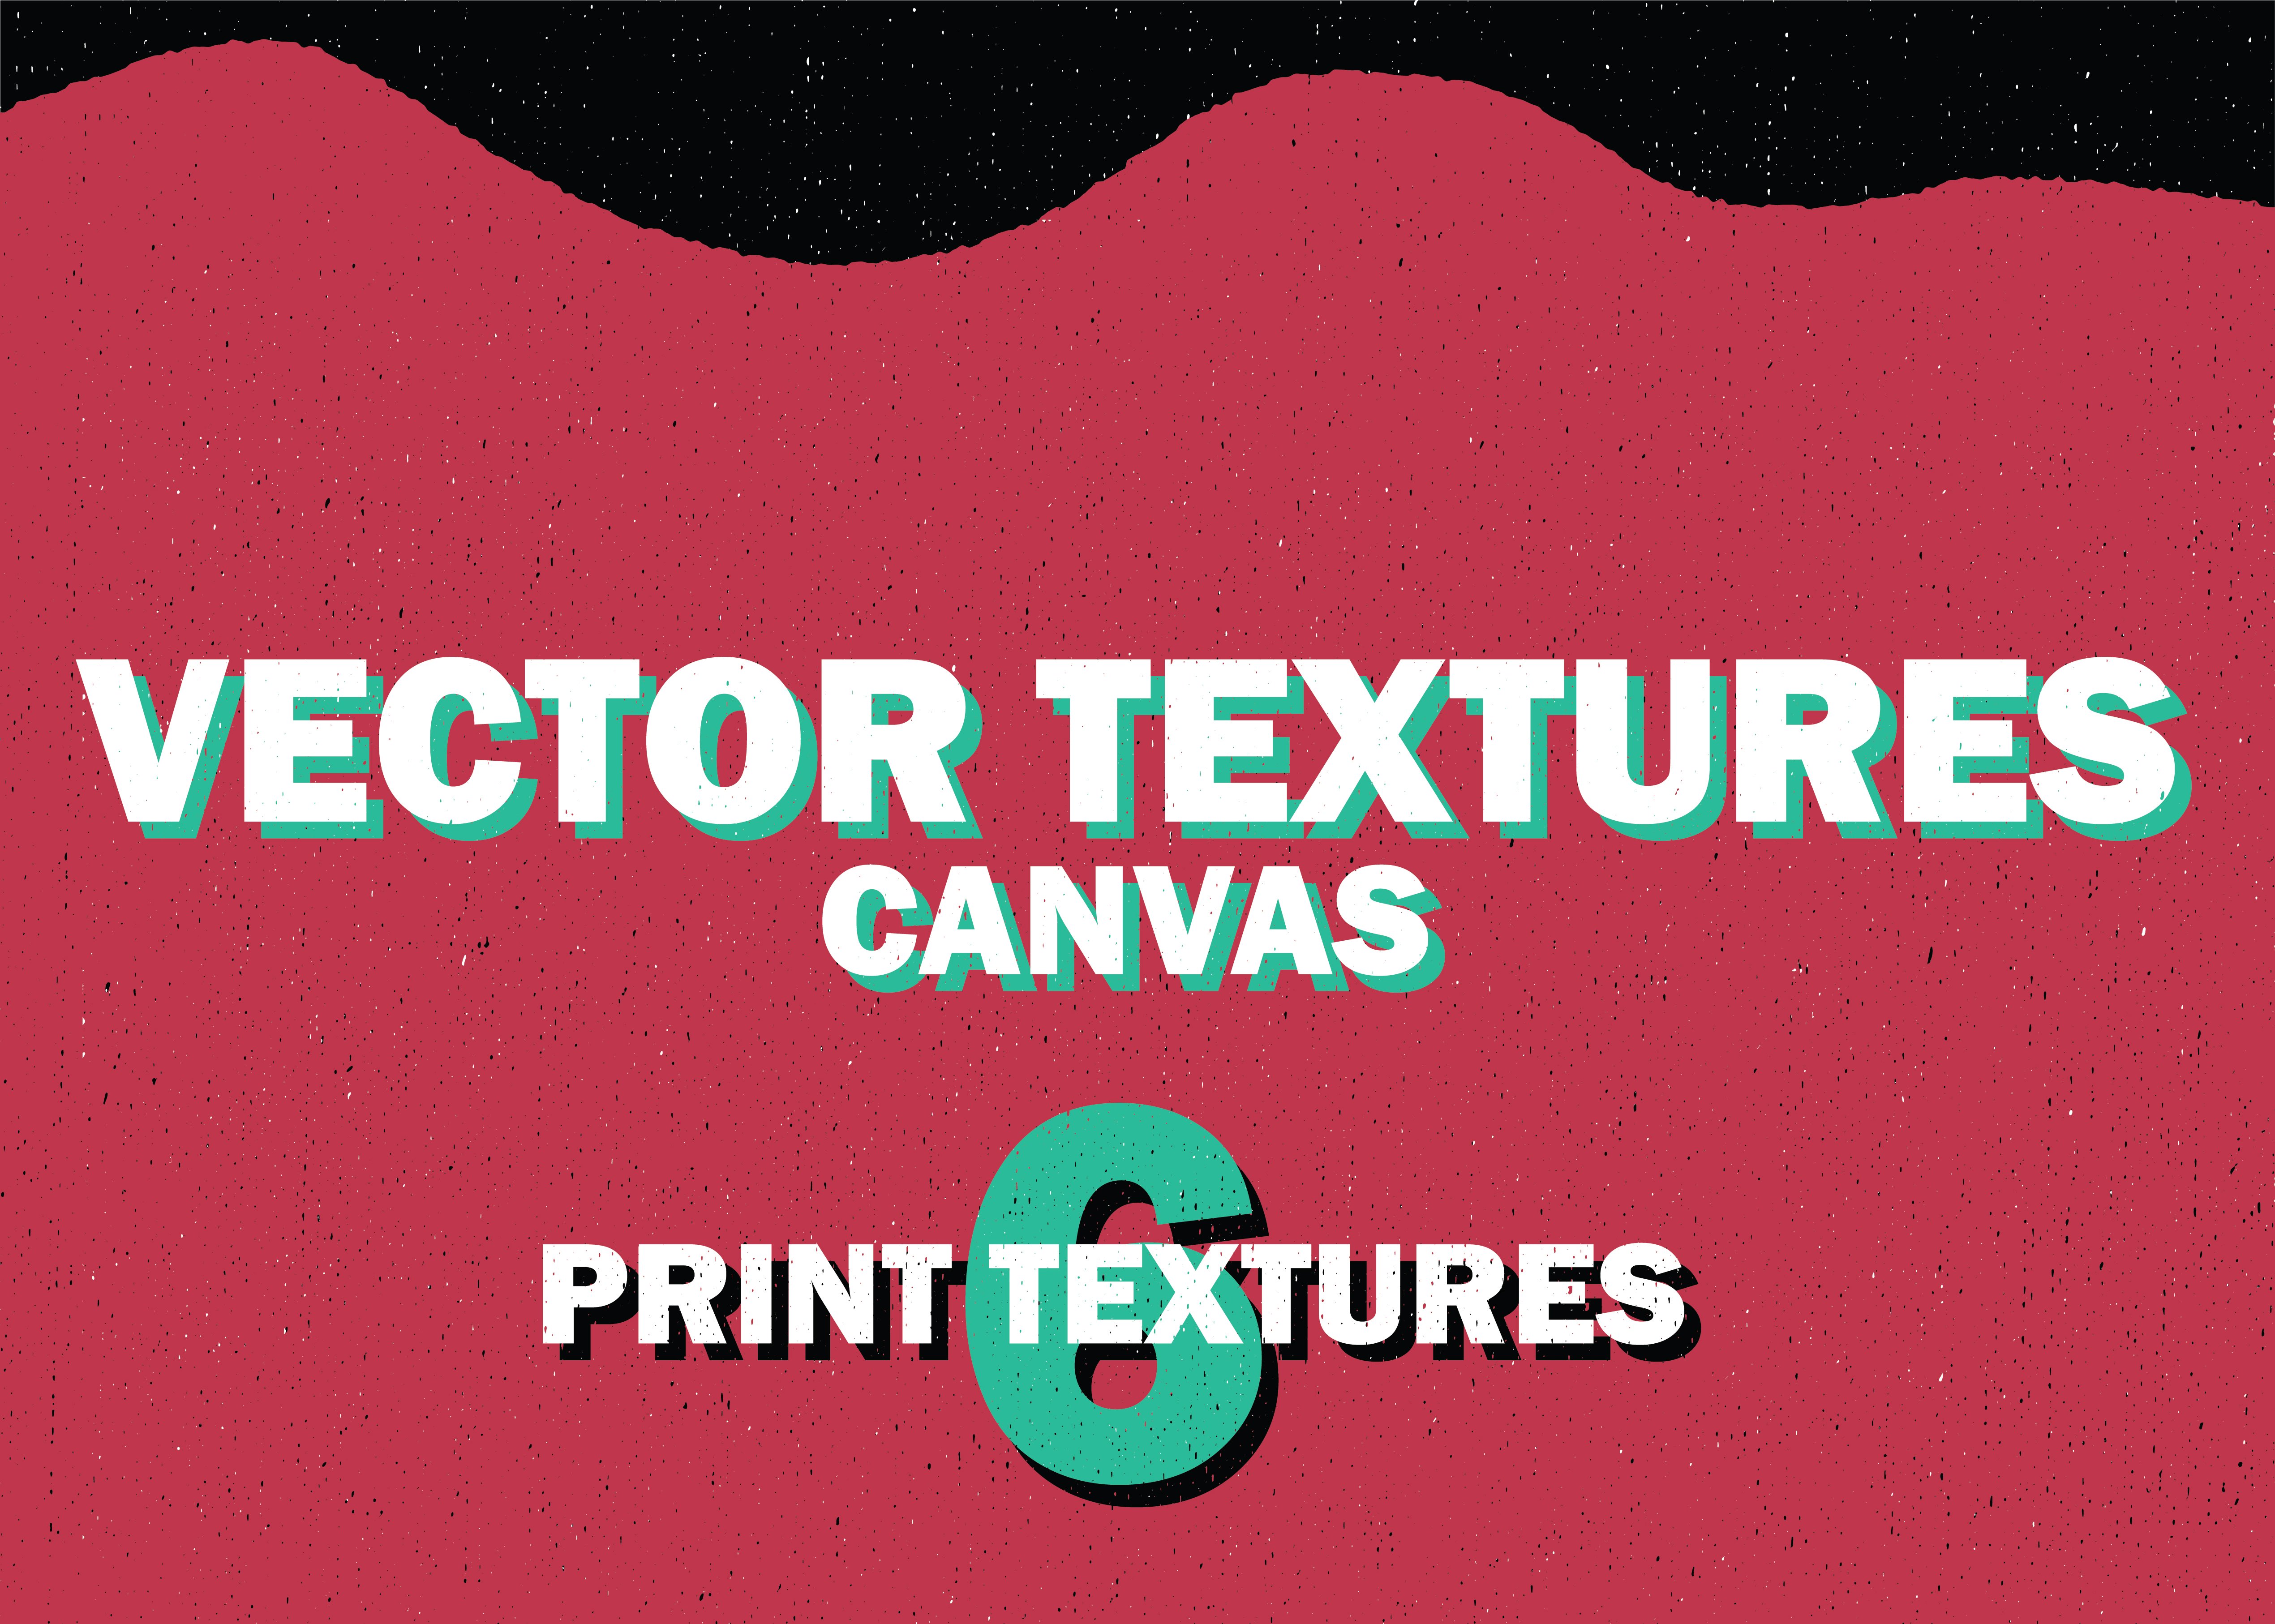 Vector Canvas Textures cover image.